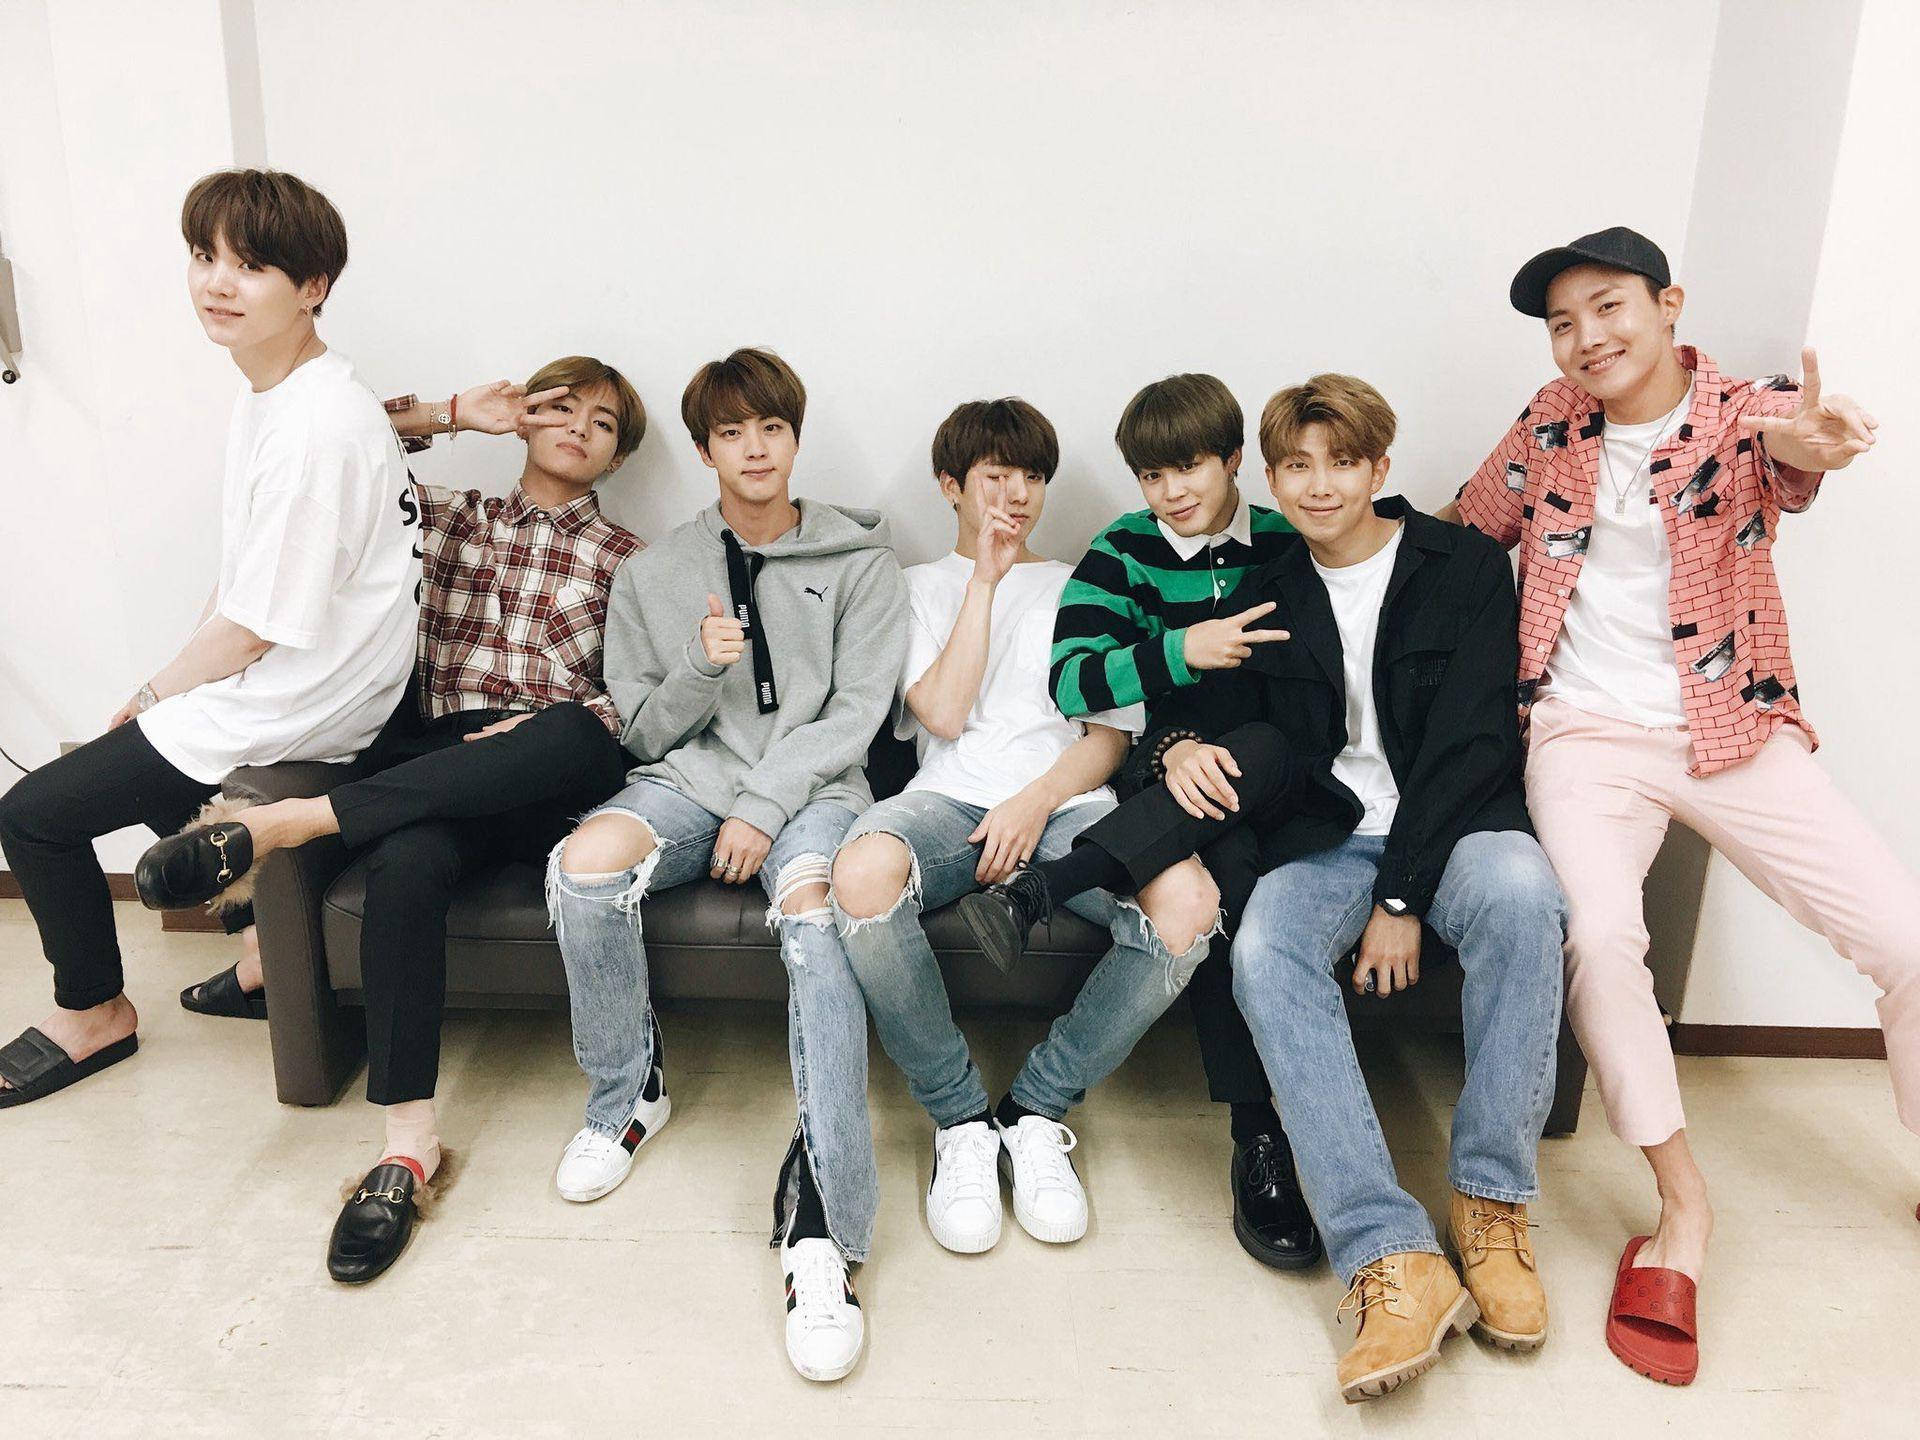 Cute Bts Posing Backstage Background